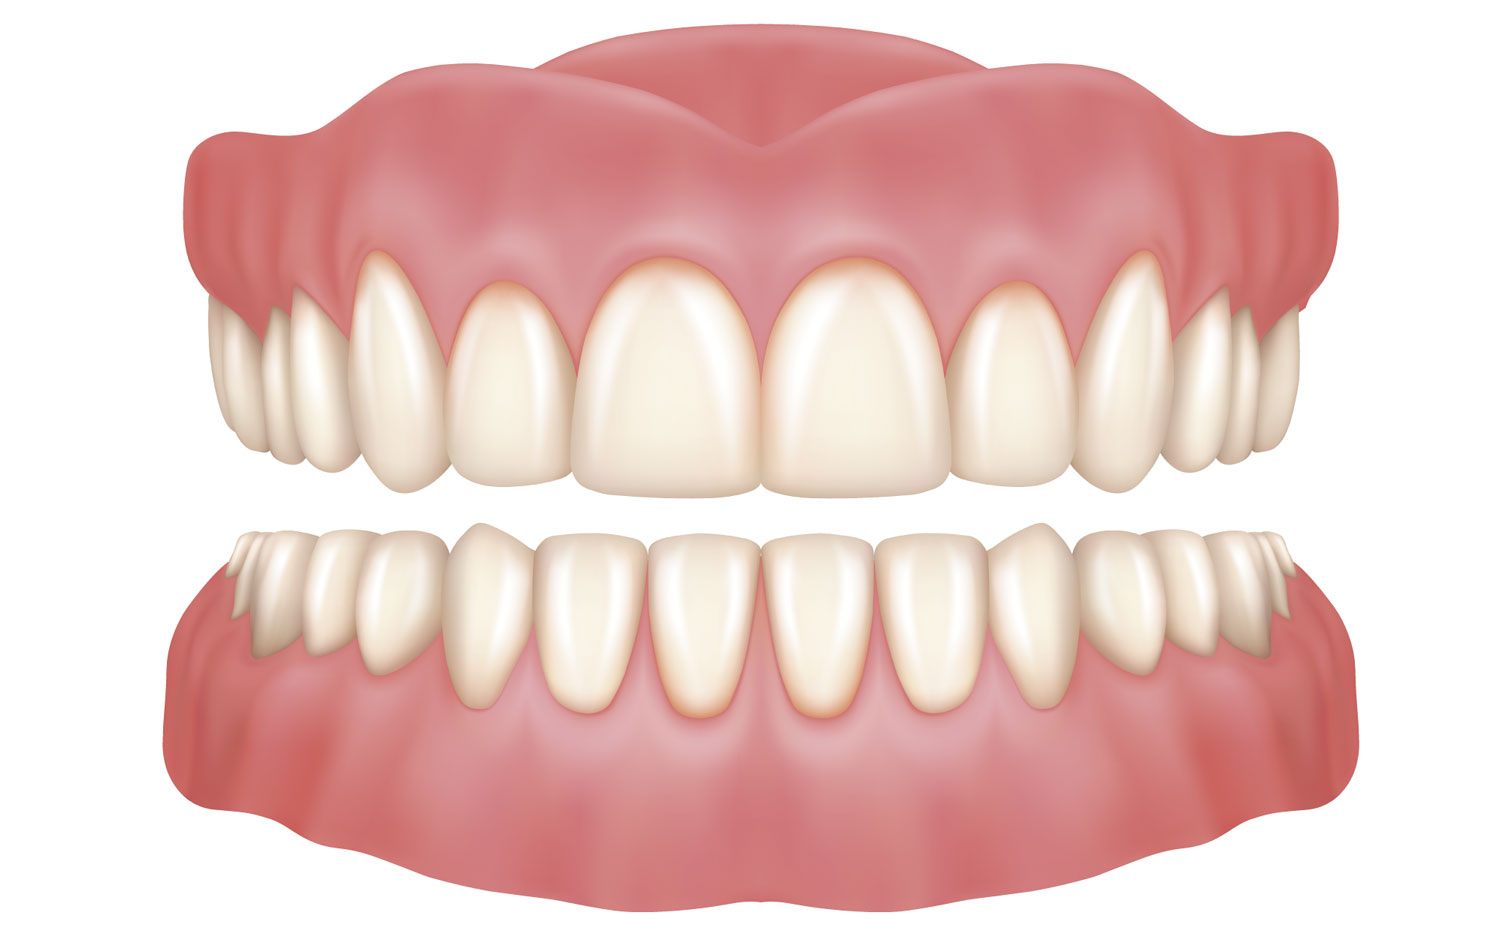 Partial and complete dentures